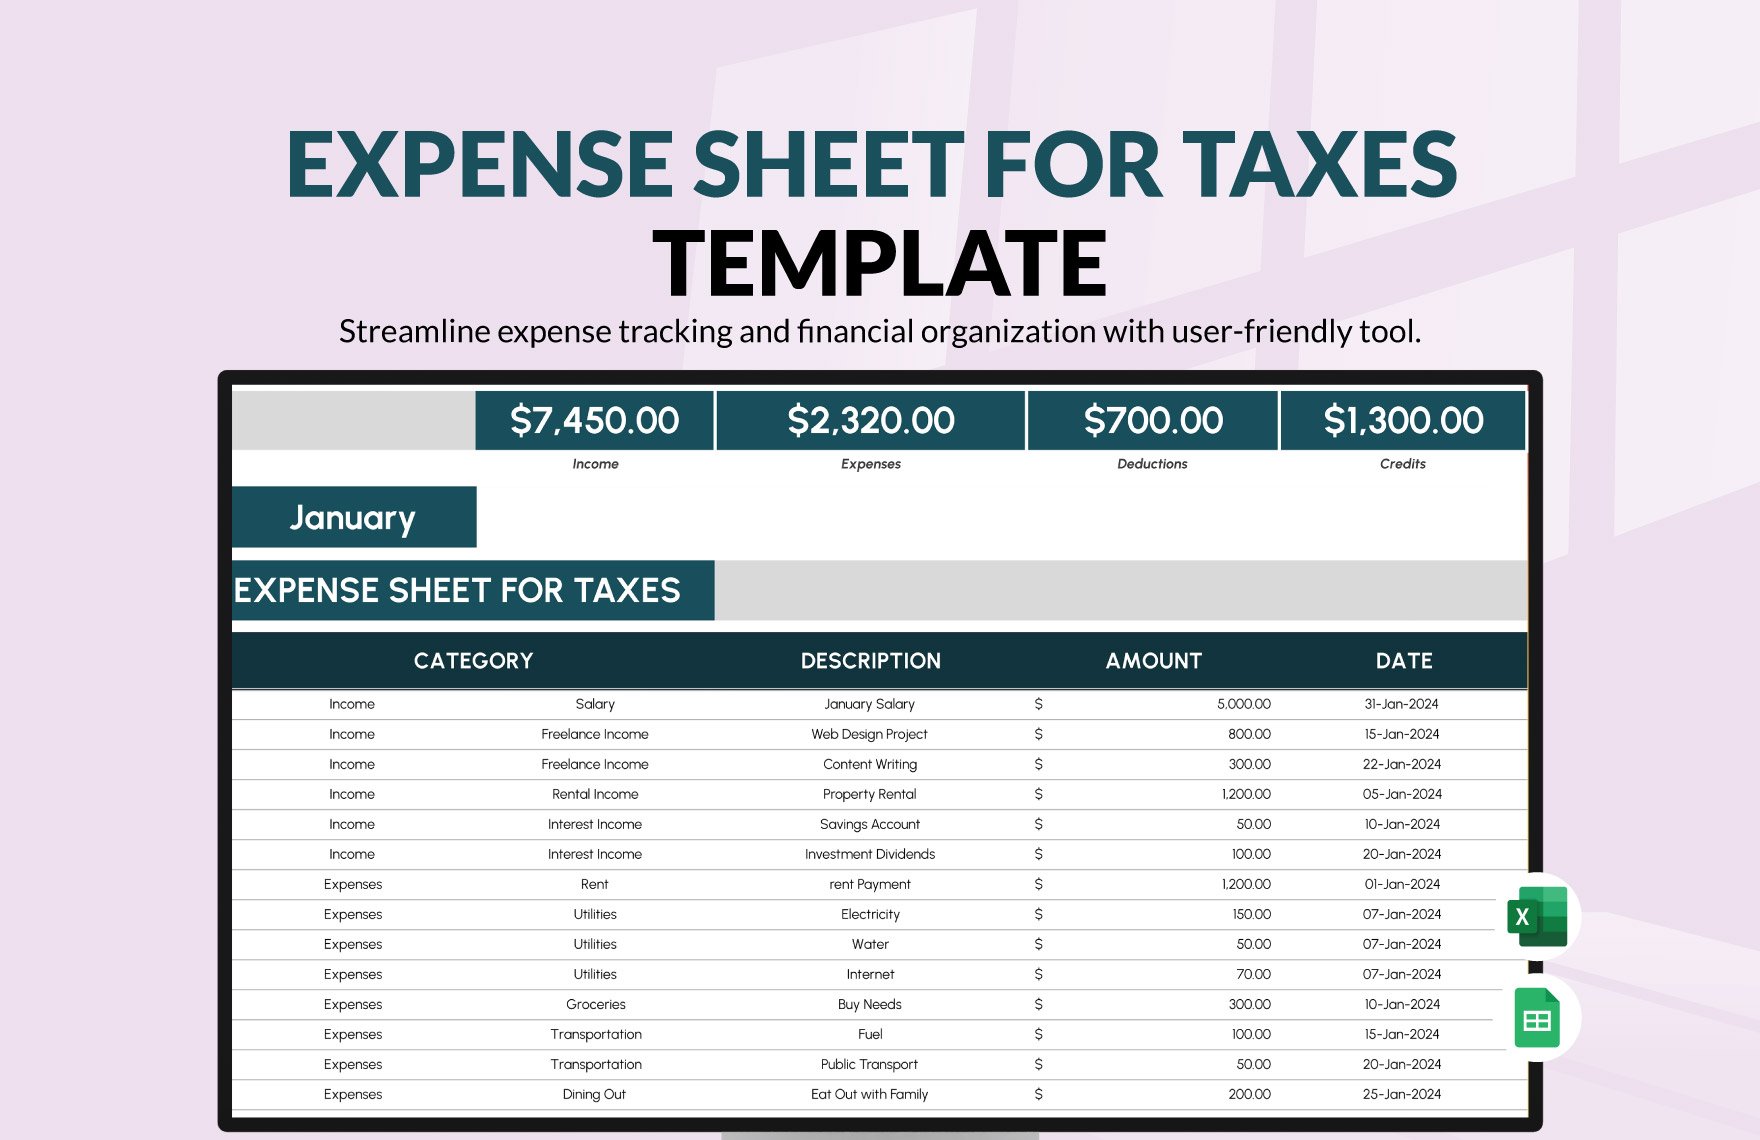 Expense Sheet for Taxes Template